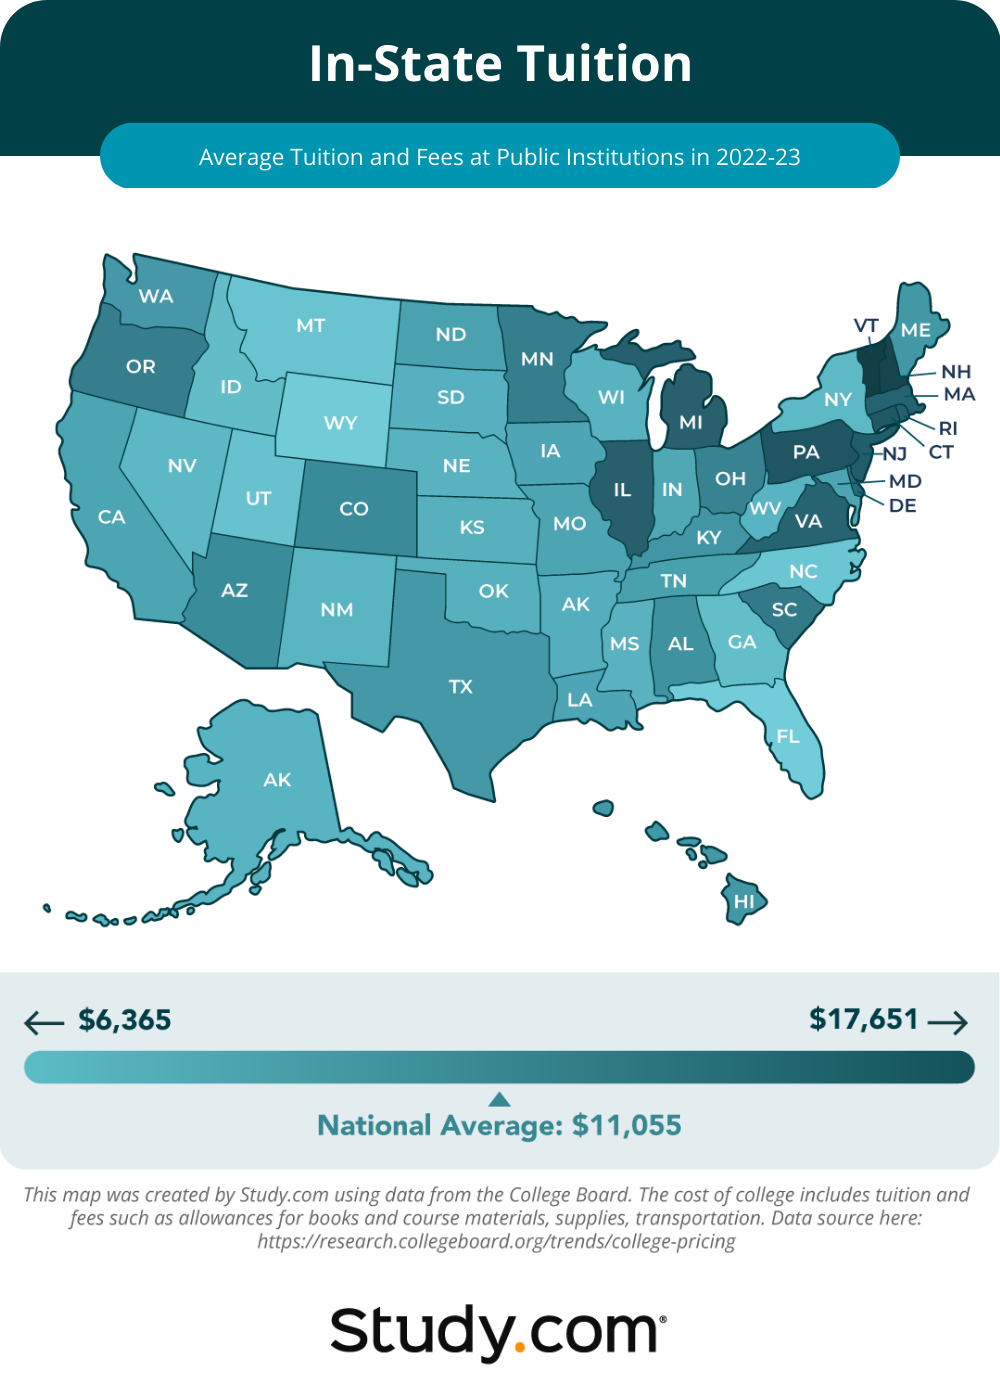 A heat map showing the average in-state tuition and fees at public institutions across the U.S. during the 2022-23 academic year.